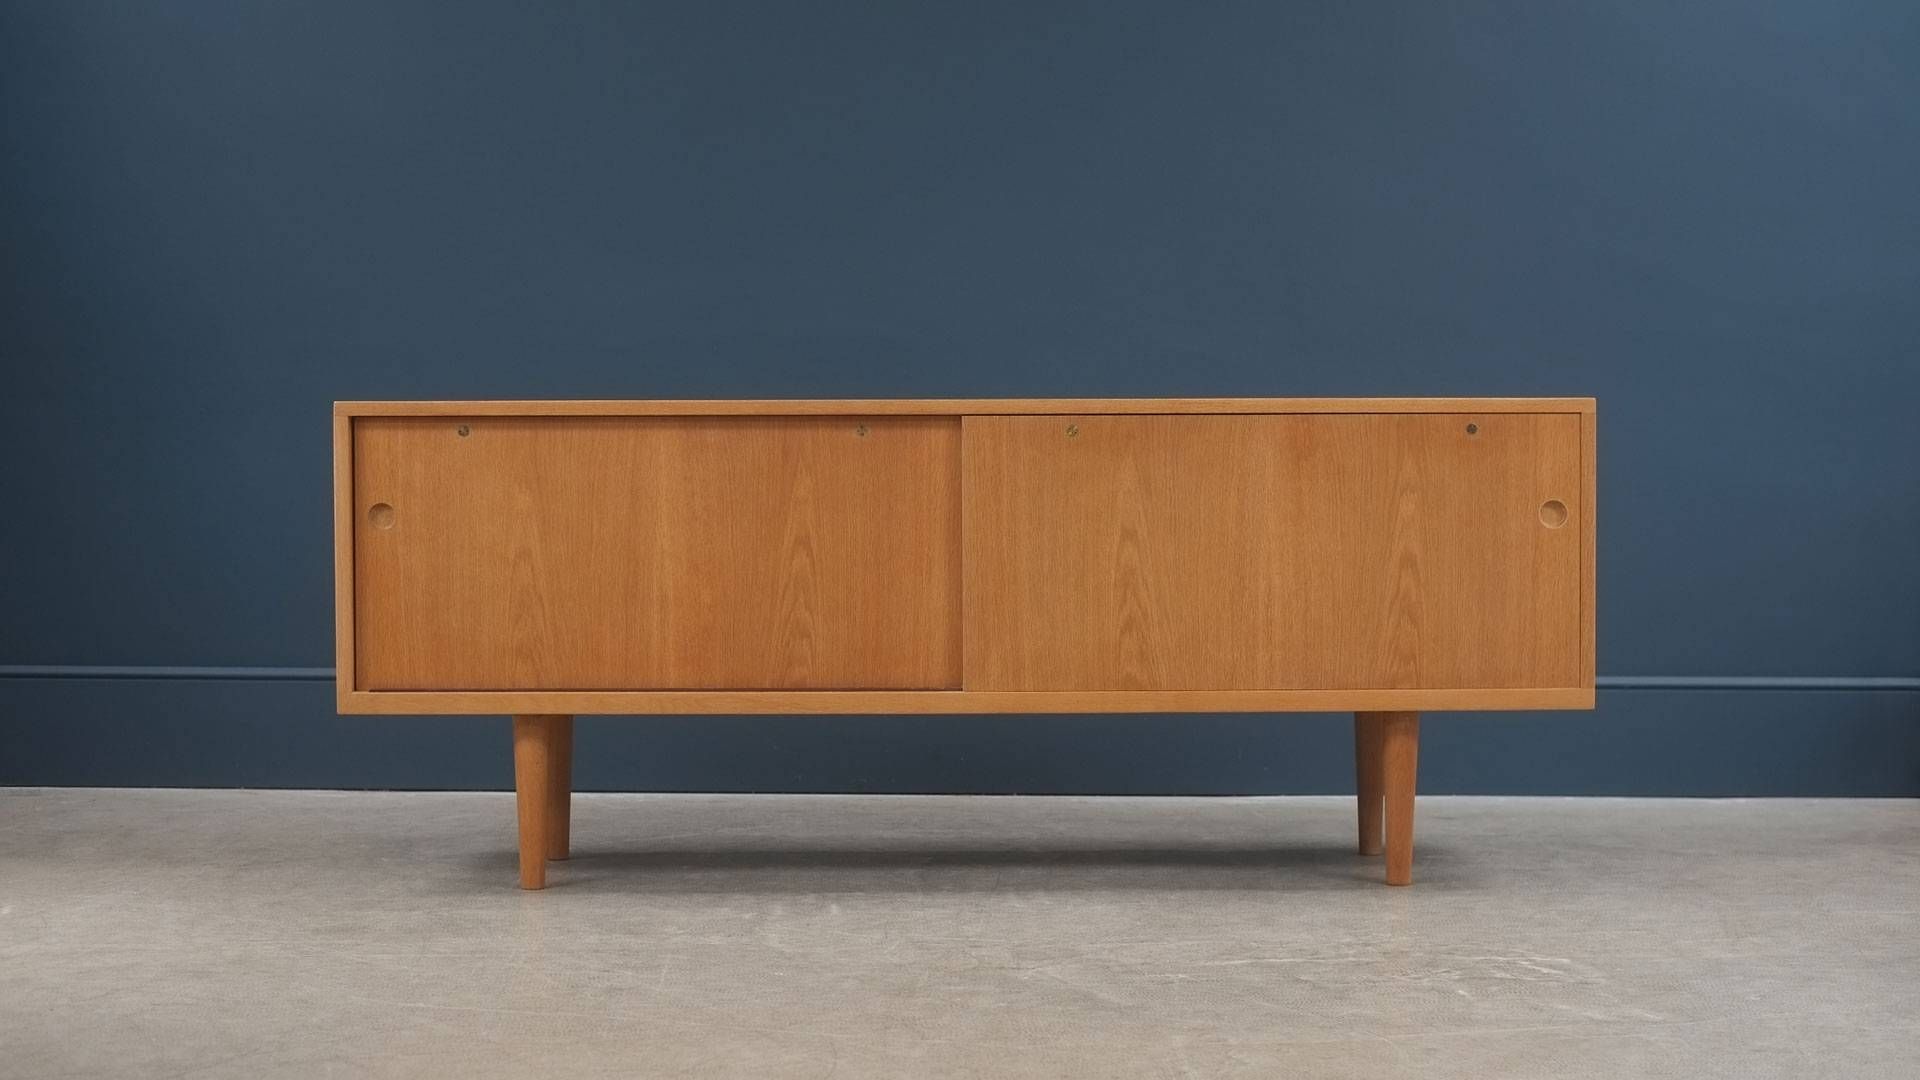 Hans Wegner Ry26 Sideboard | The Modern Warehouse Throughout Latest Hans Wegner Sideboards (View 6 of 15)